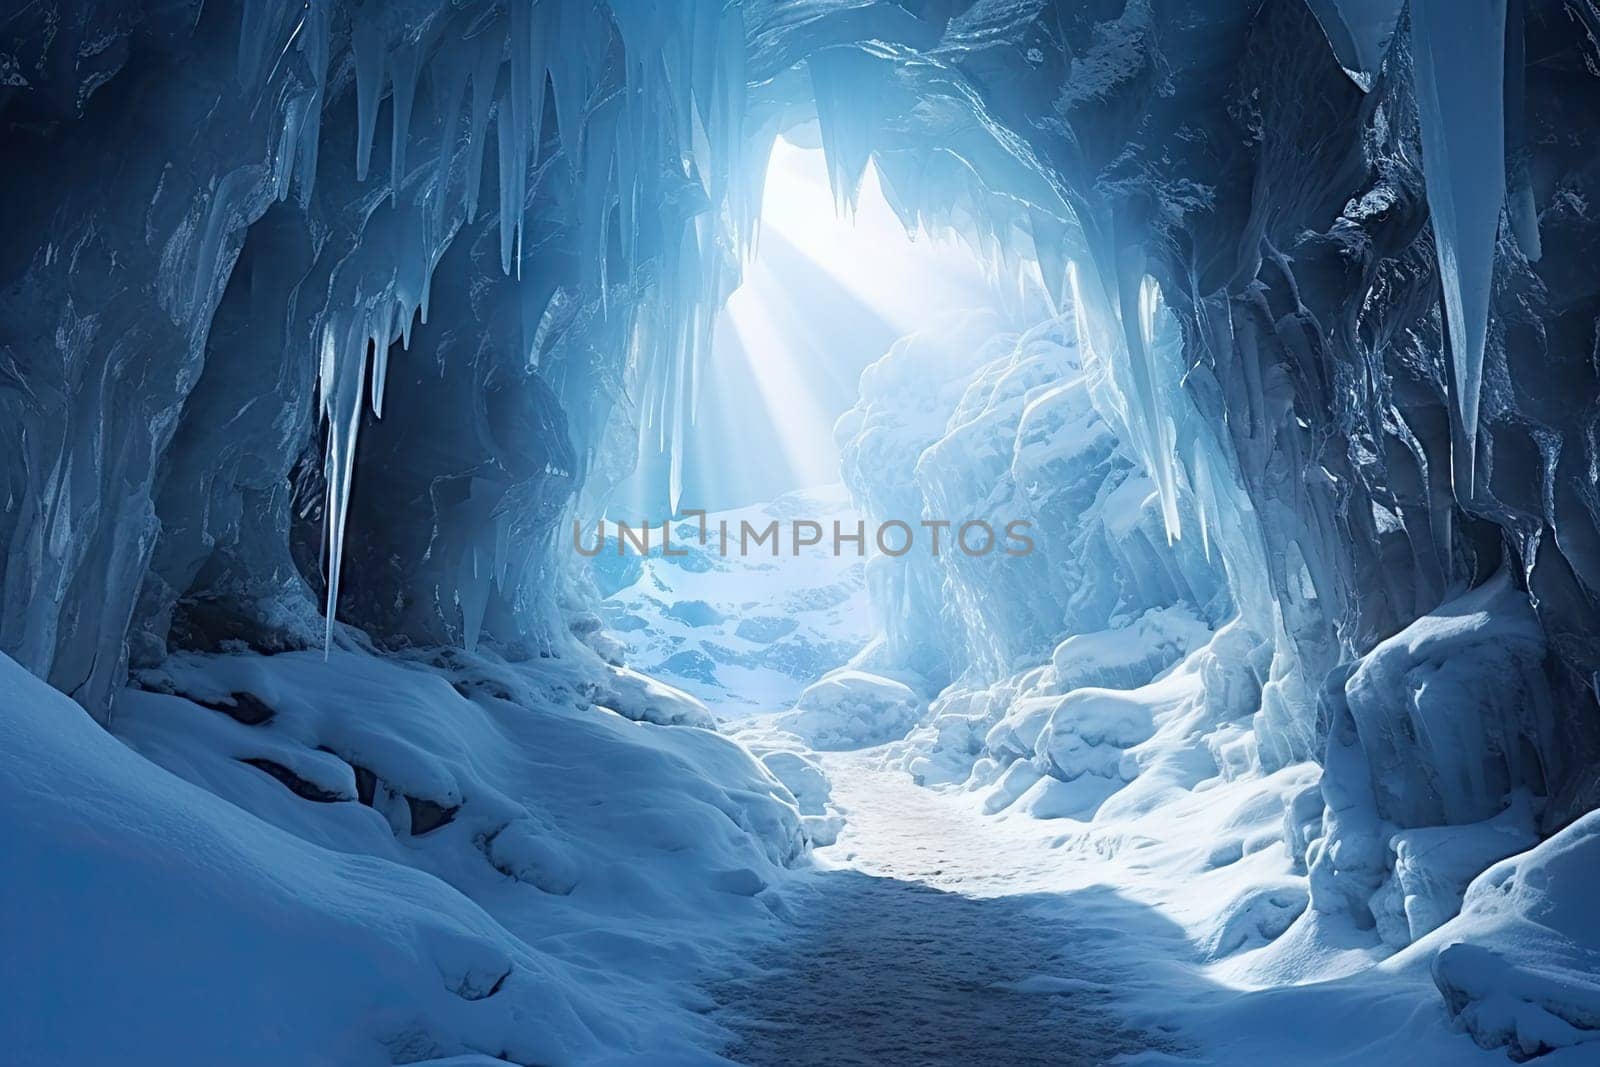 A Majestic Snow-Covered Mountain Tunnel Revealing a Hidden World of Mystery and Adventure